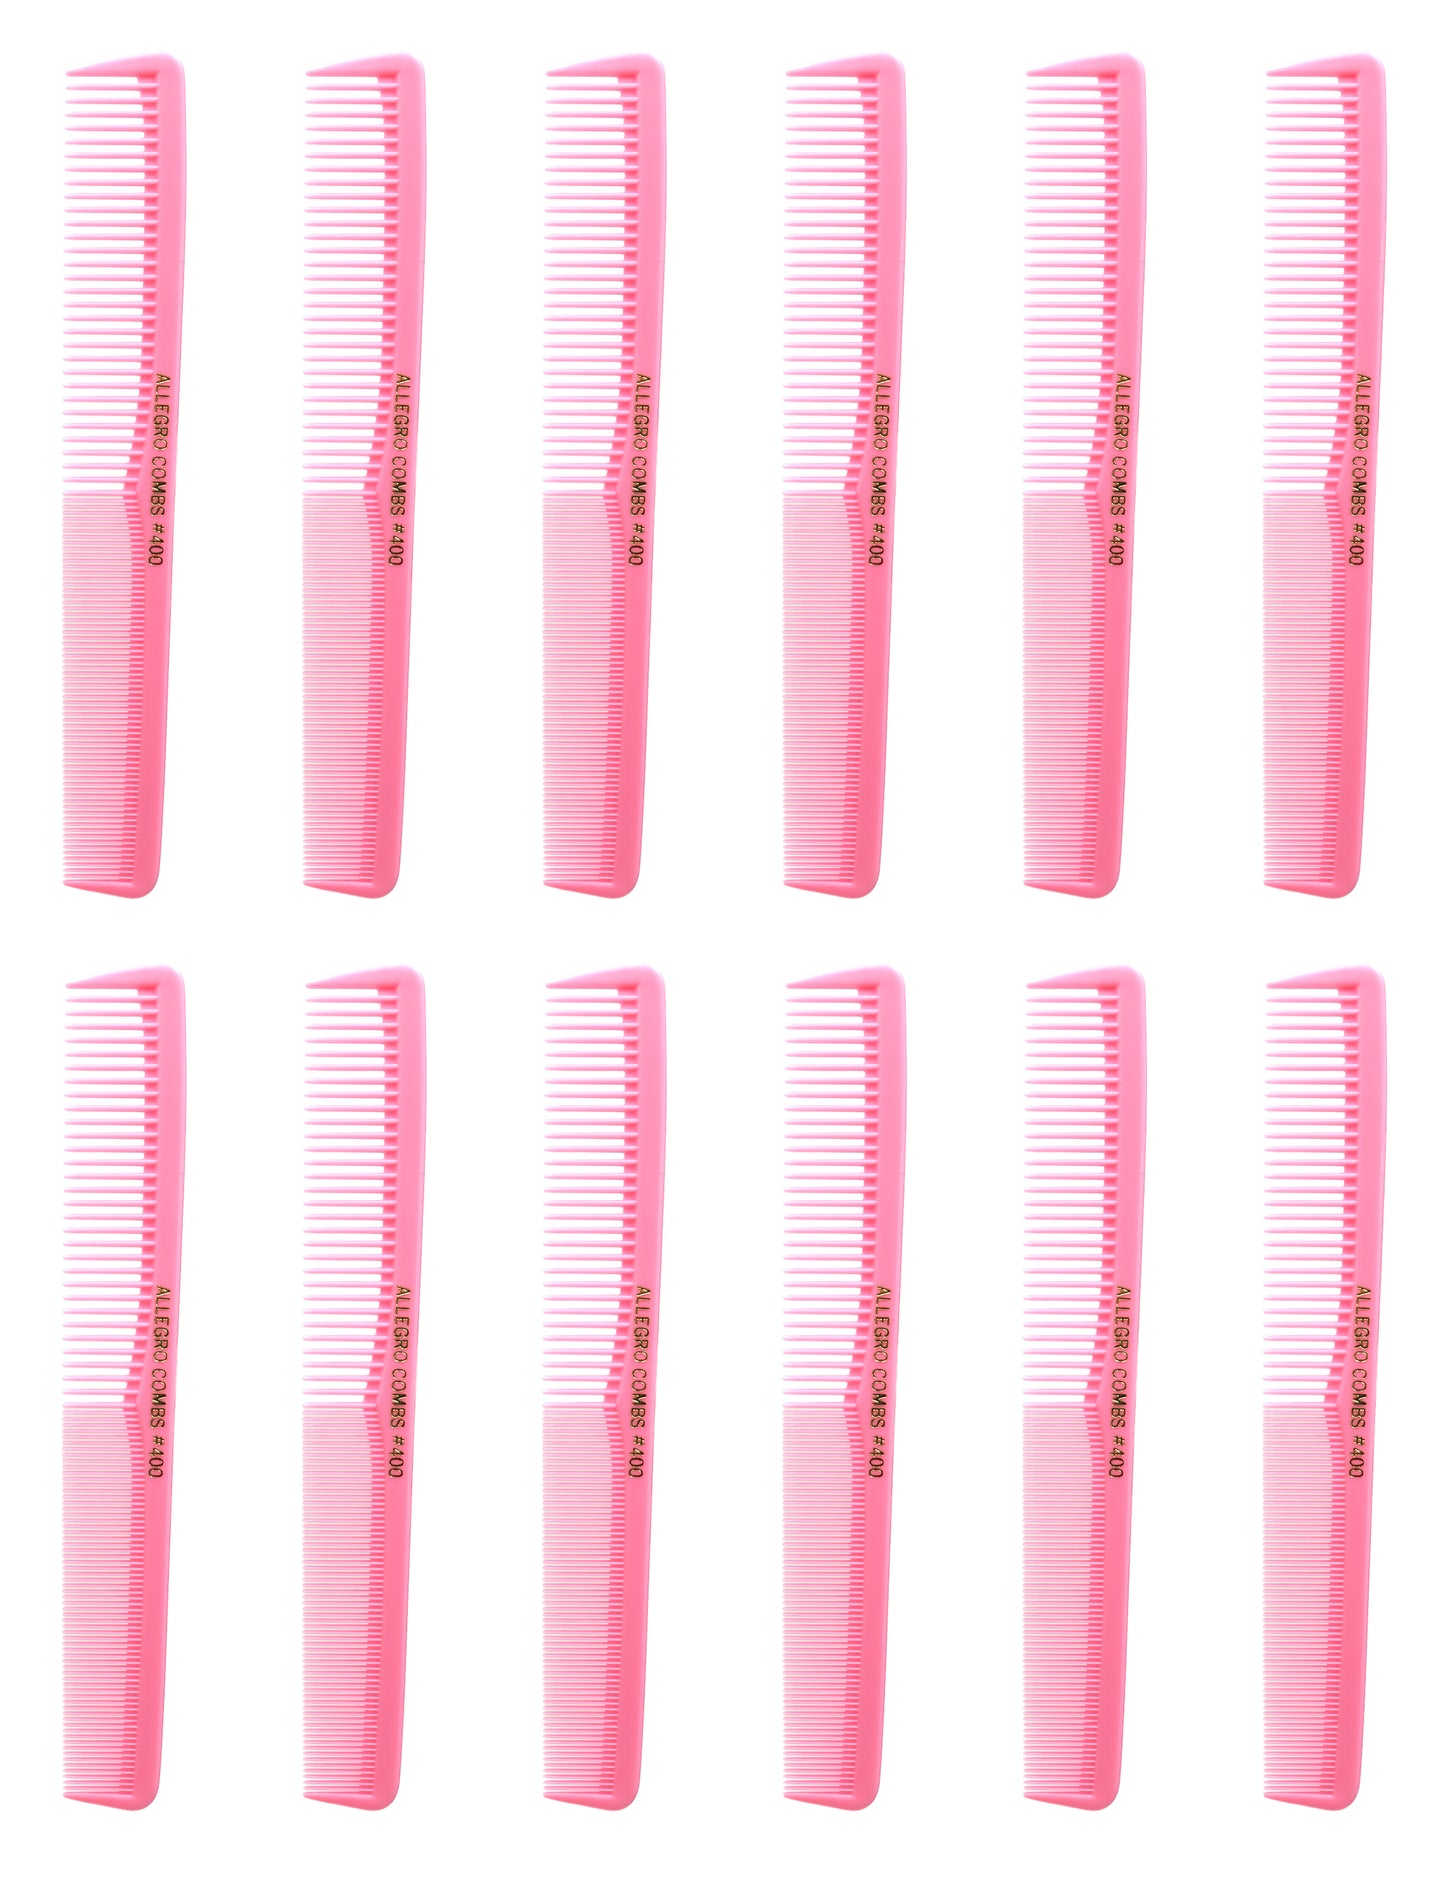 Allegro Combs 400 Barbers Combs Cutting Combs All Purpose Combs. Fresh Pink Combs. 12 Pk